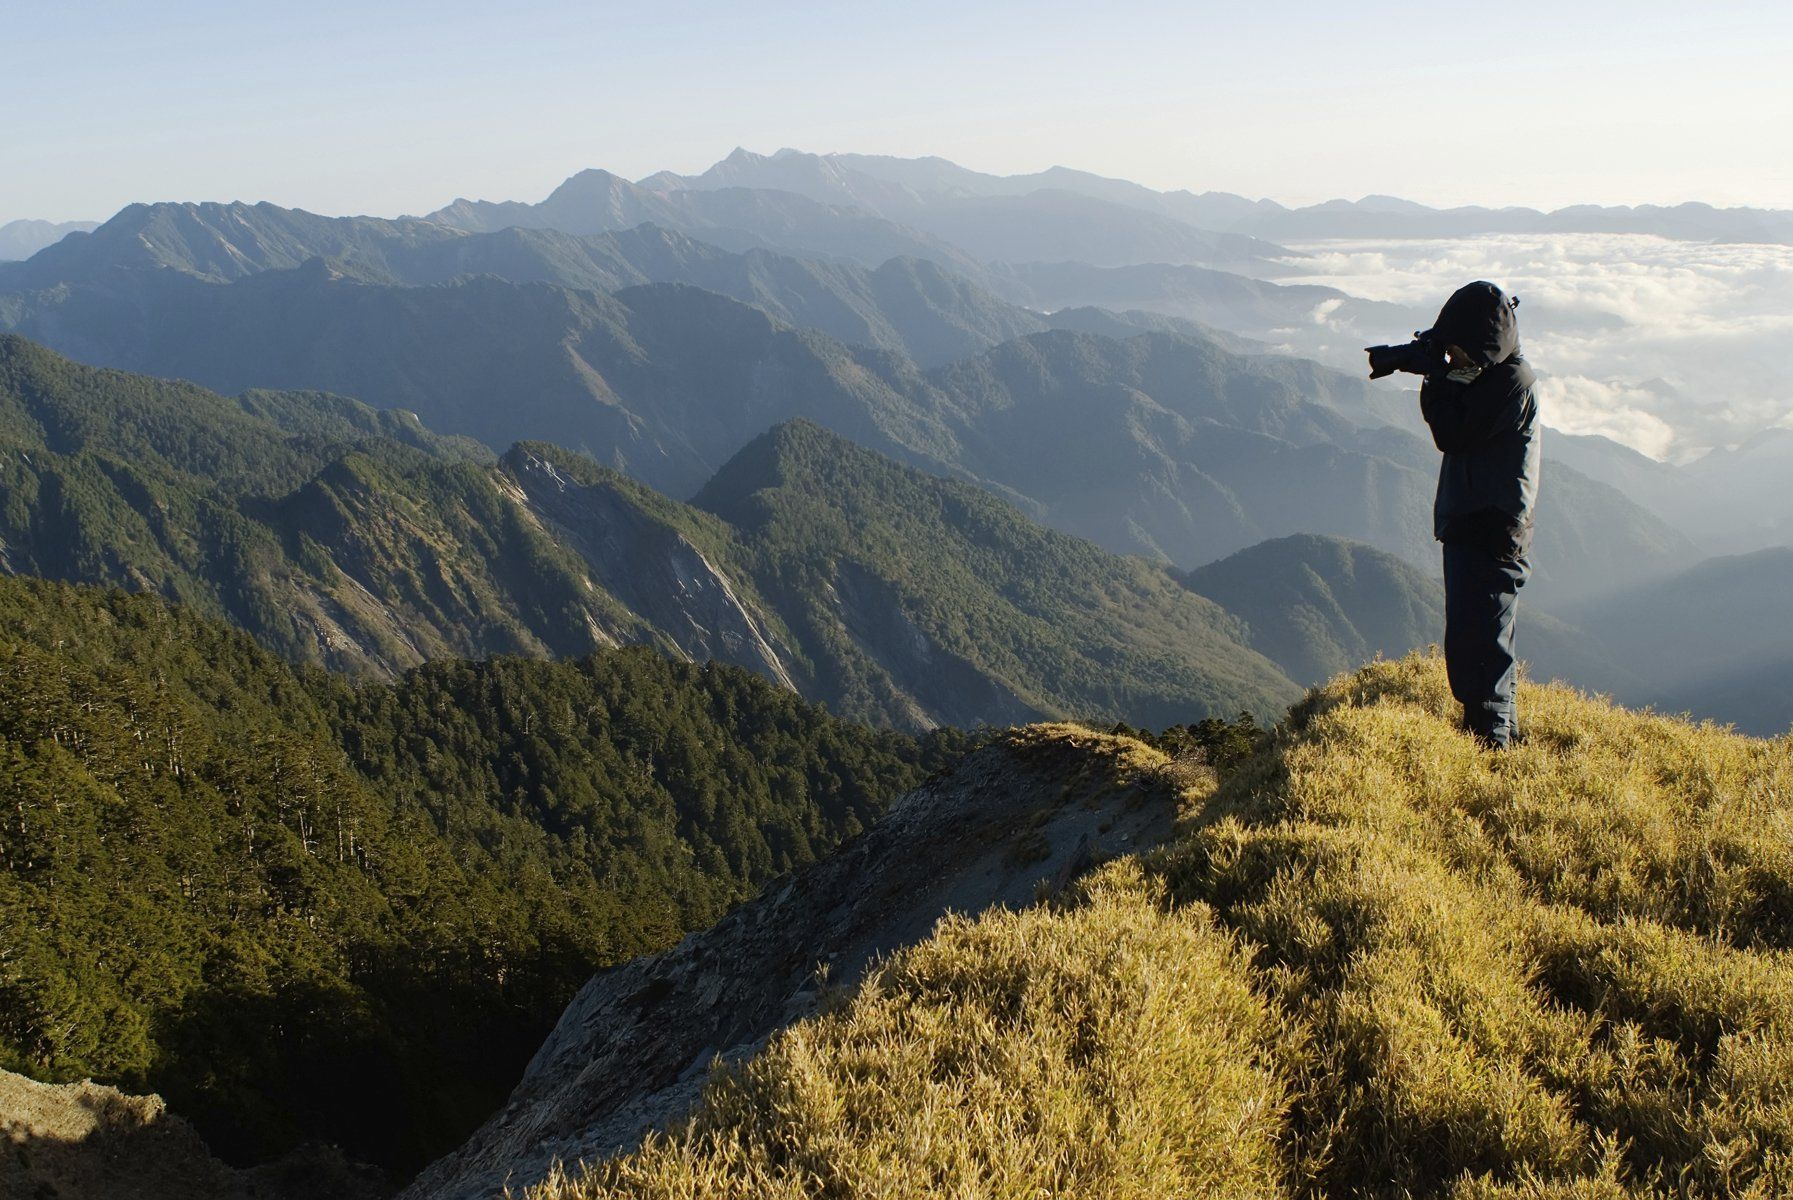 Person on a mountain taking a picture of scenery